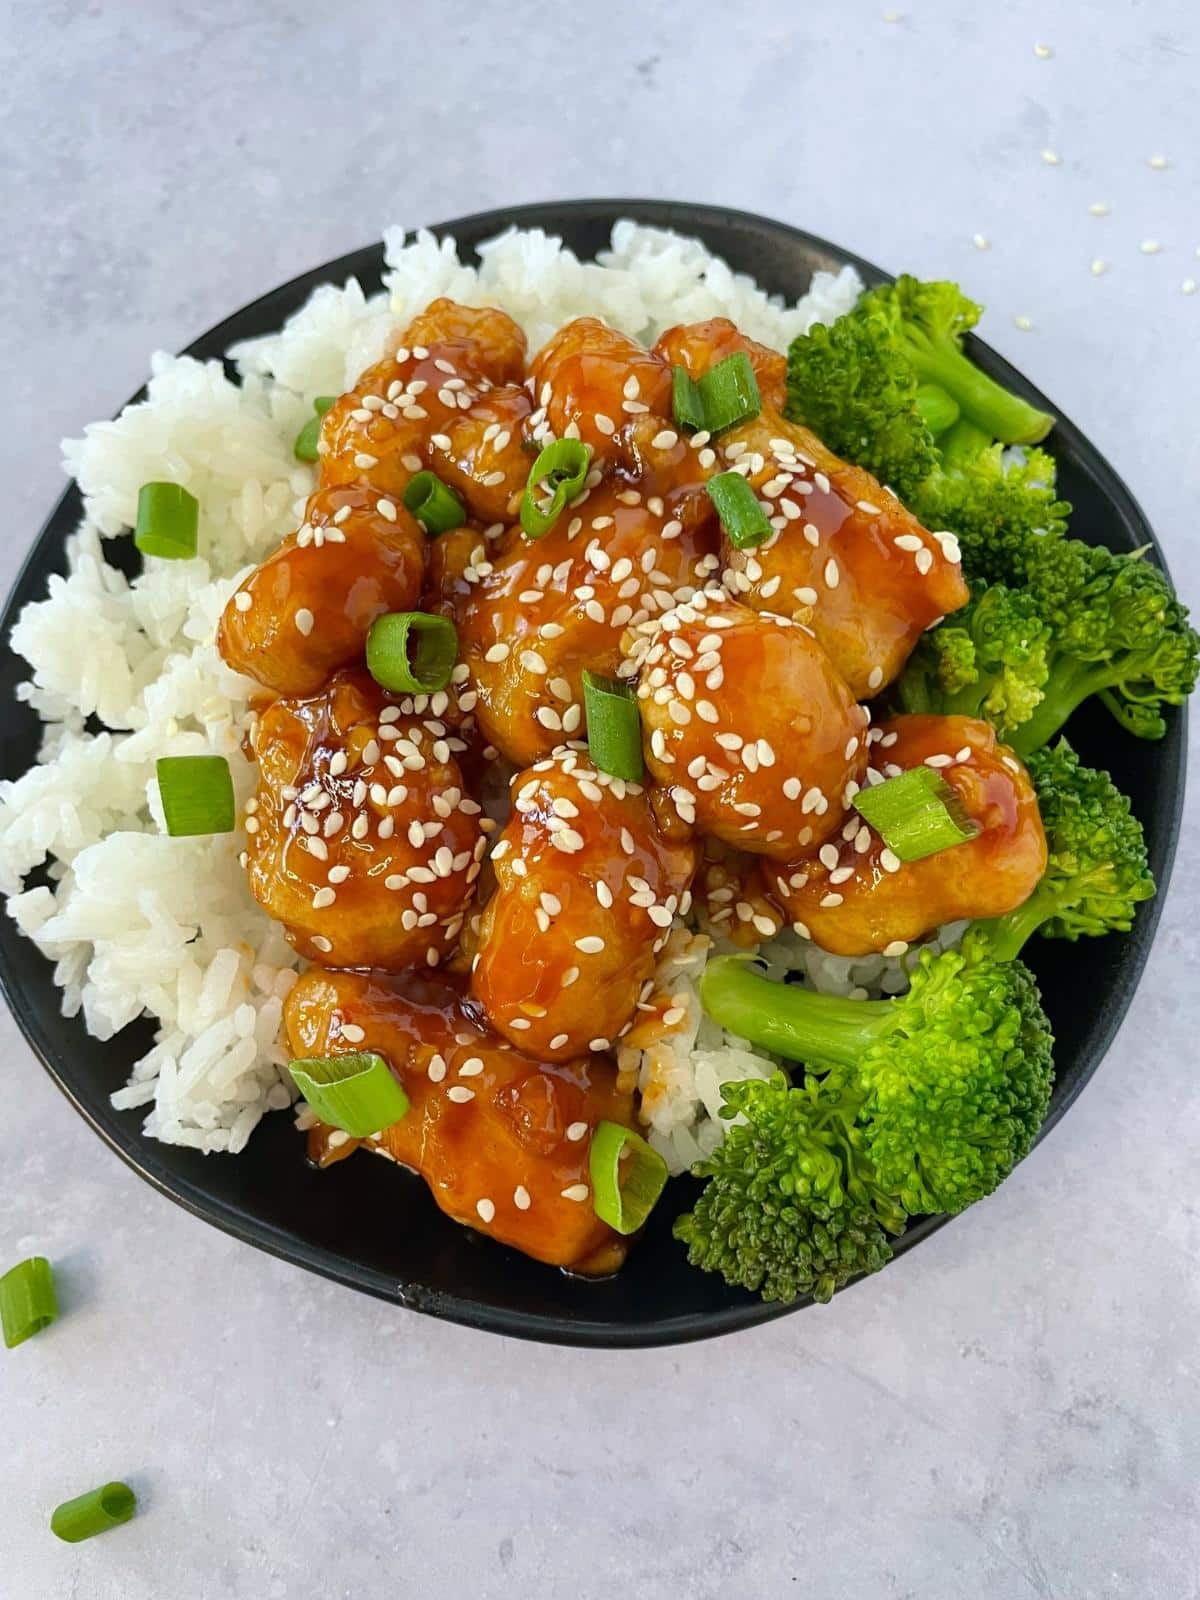 Sesame chicken with broccoli and rice.